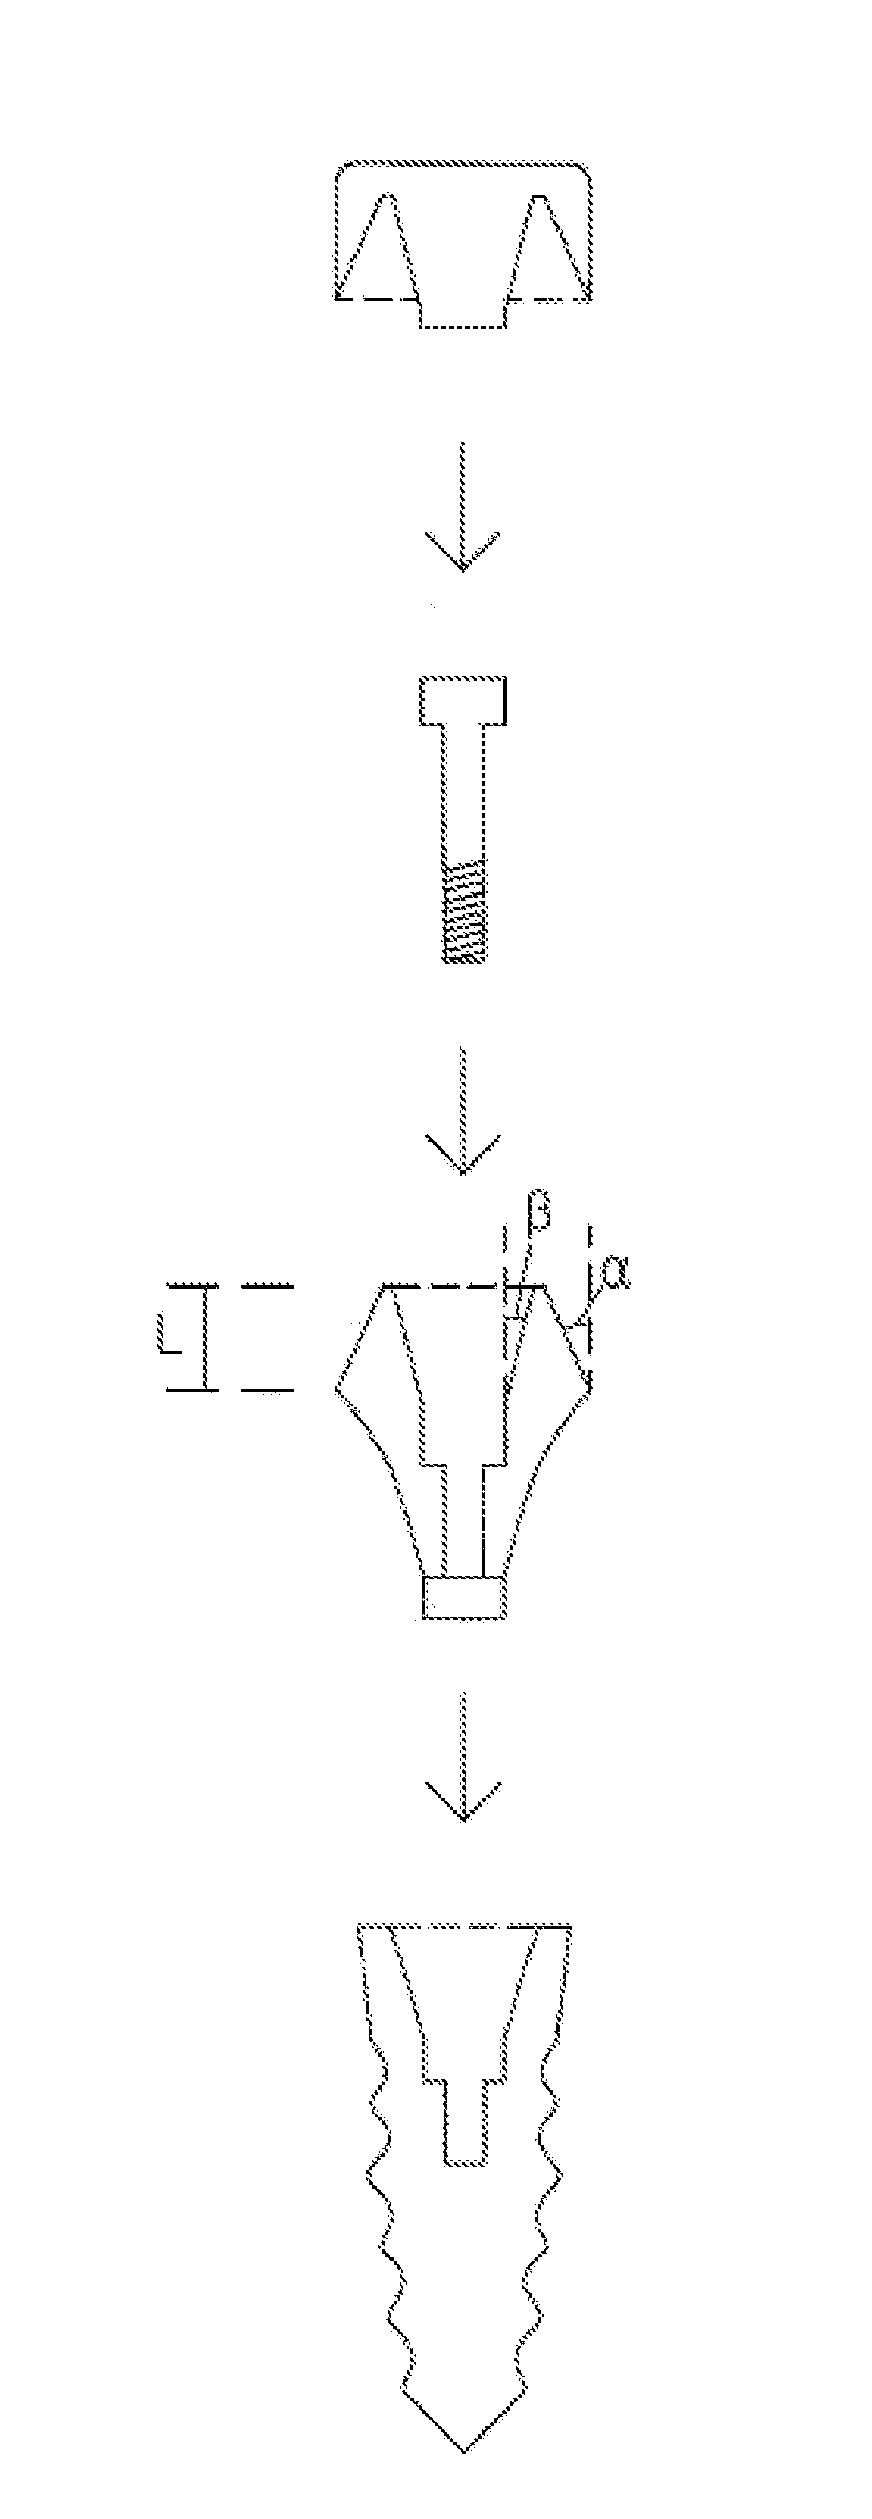 Abutment capable of accommodating core crowns manufactured at various angles and functioning as a healing abutment having a cap attached thereto, method for manufacturing dental implant prostheses using the abutment, and method for implant surgery using the abutment